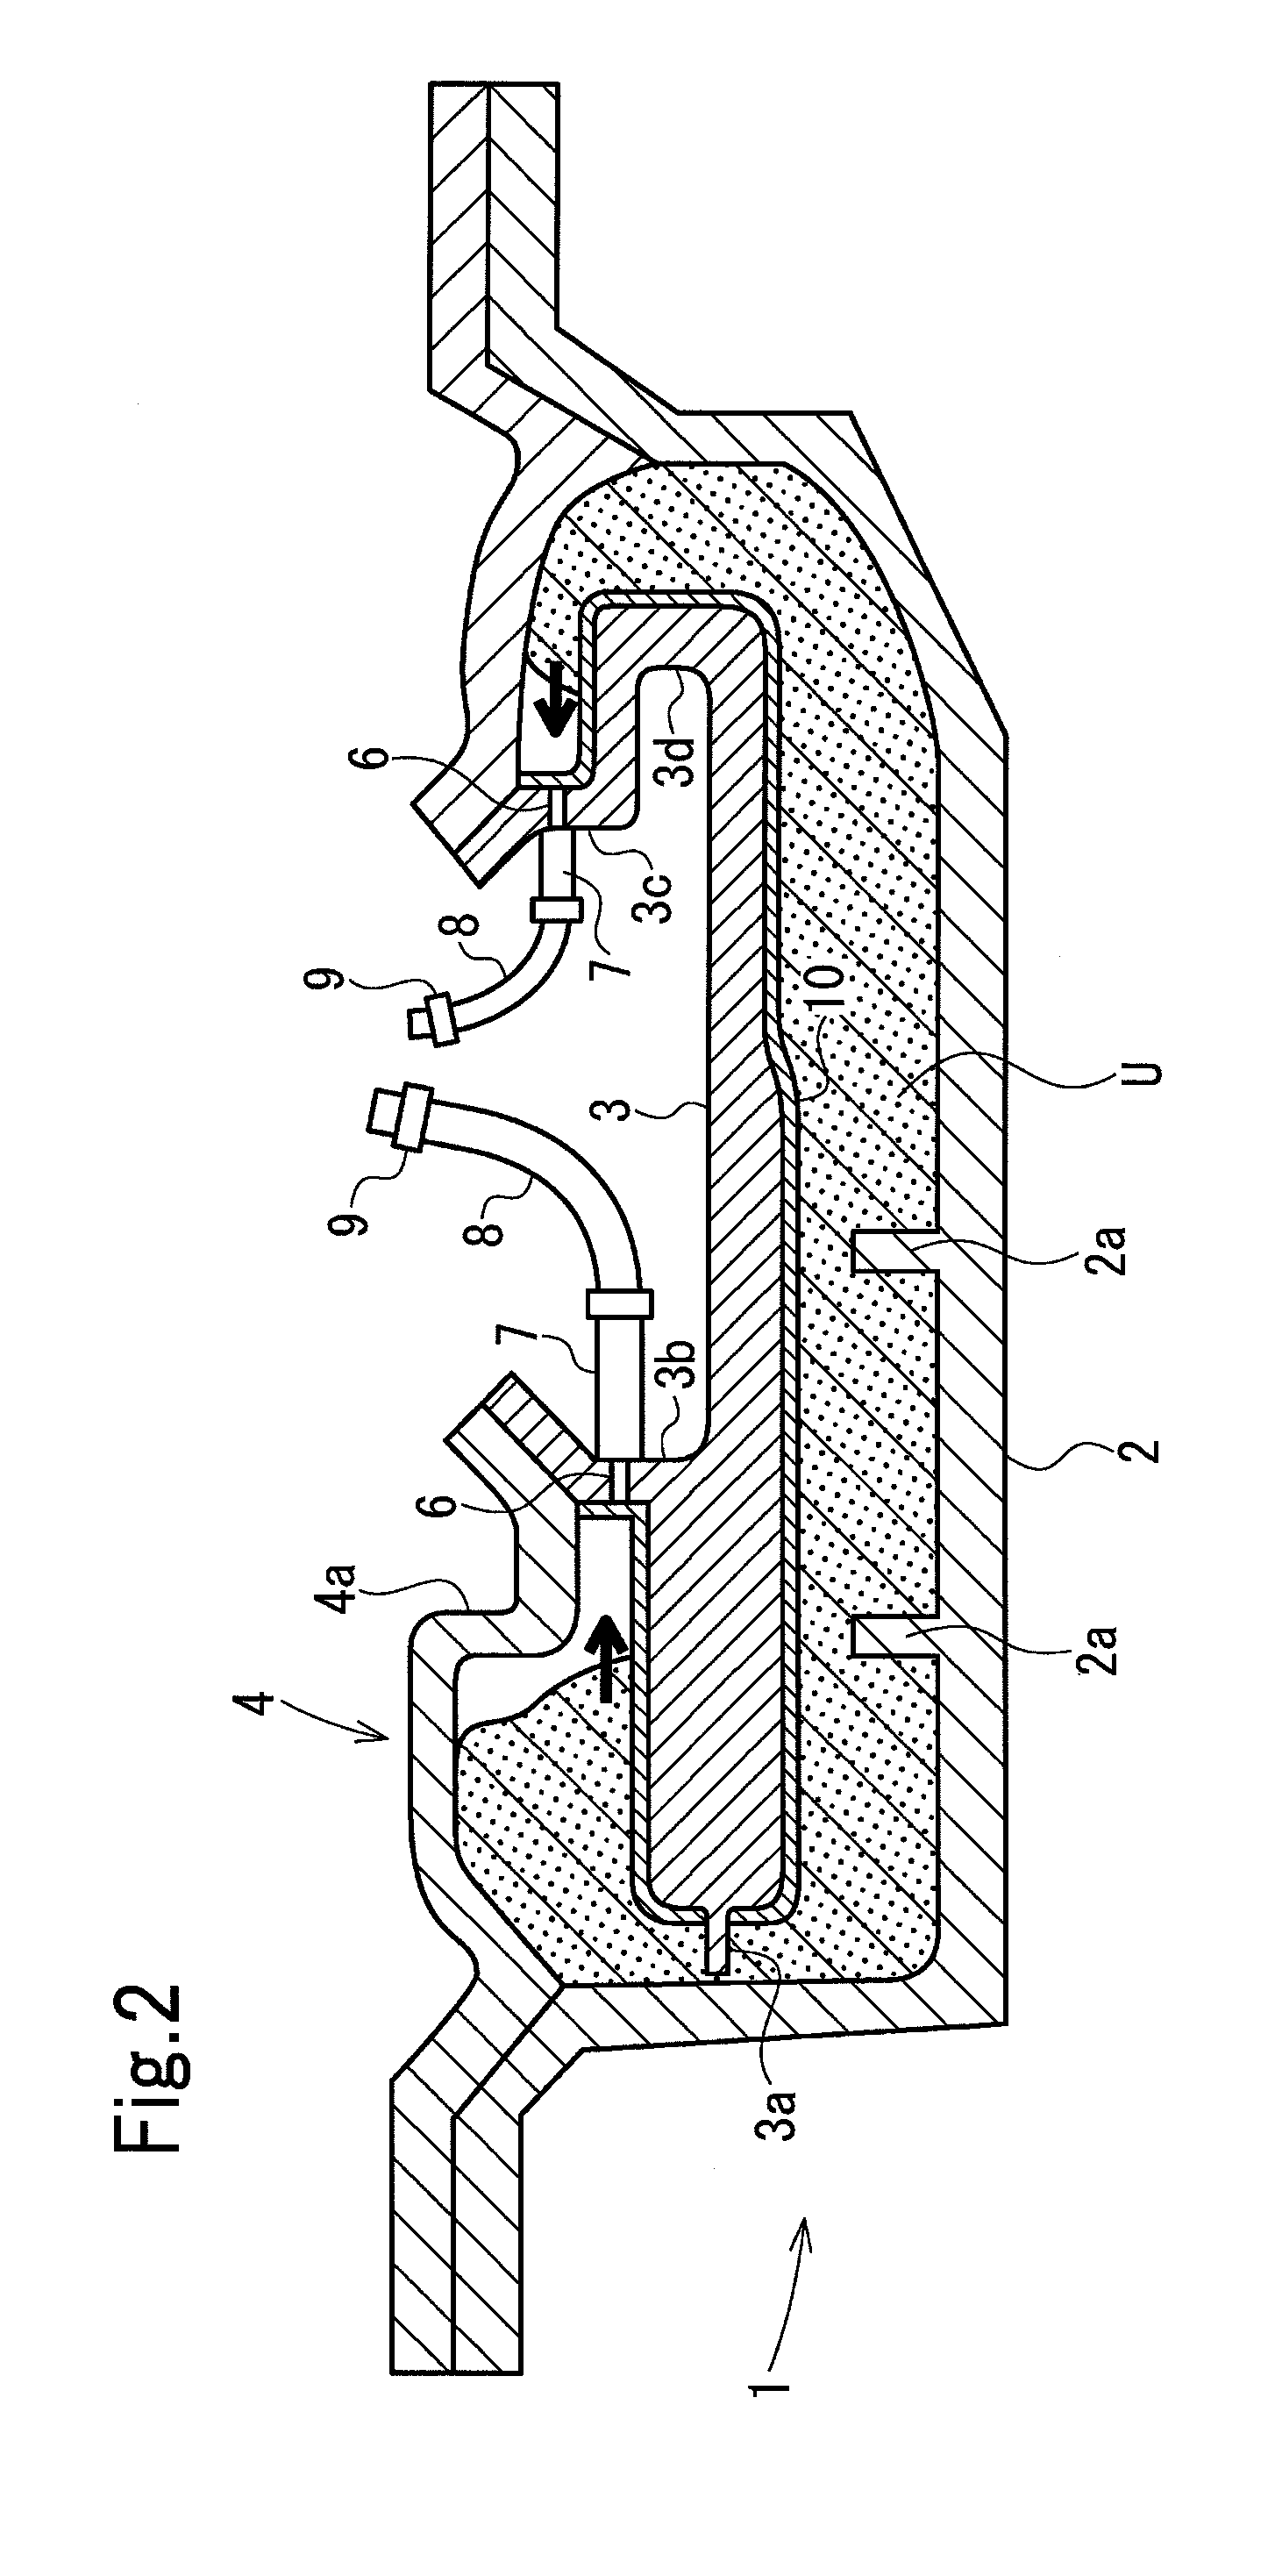 Mold and method for molding resin foamed molding